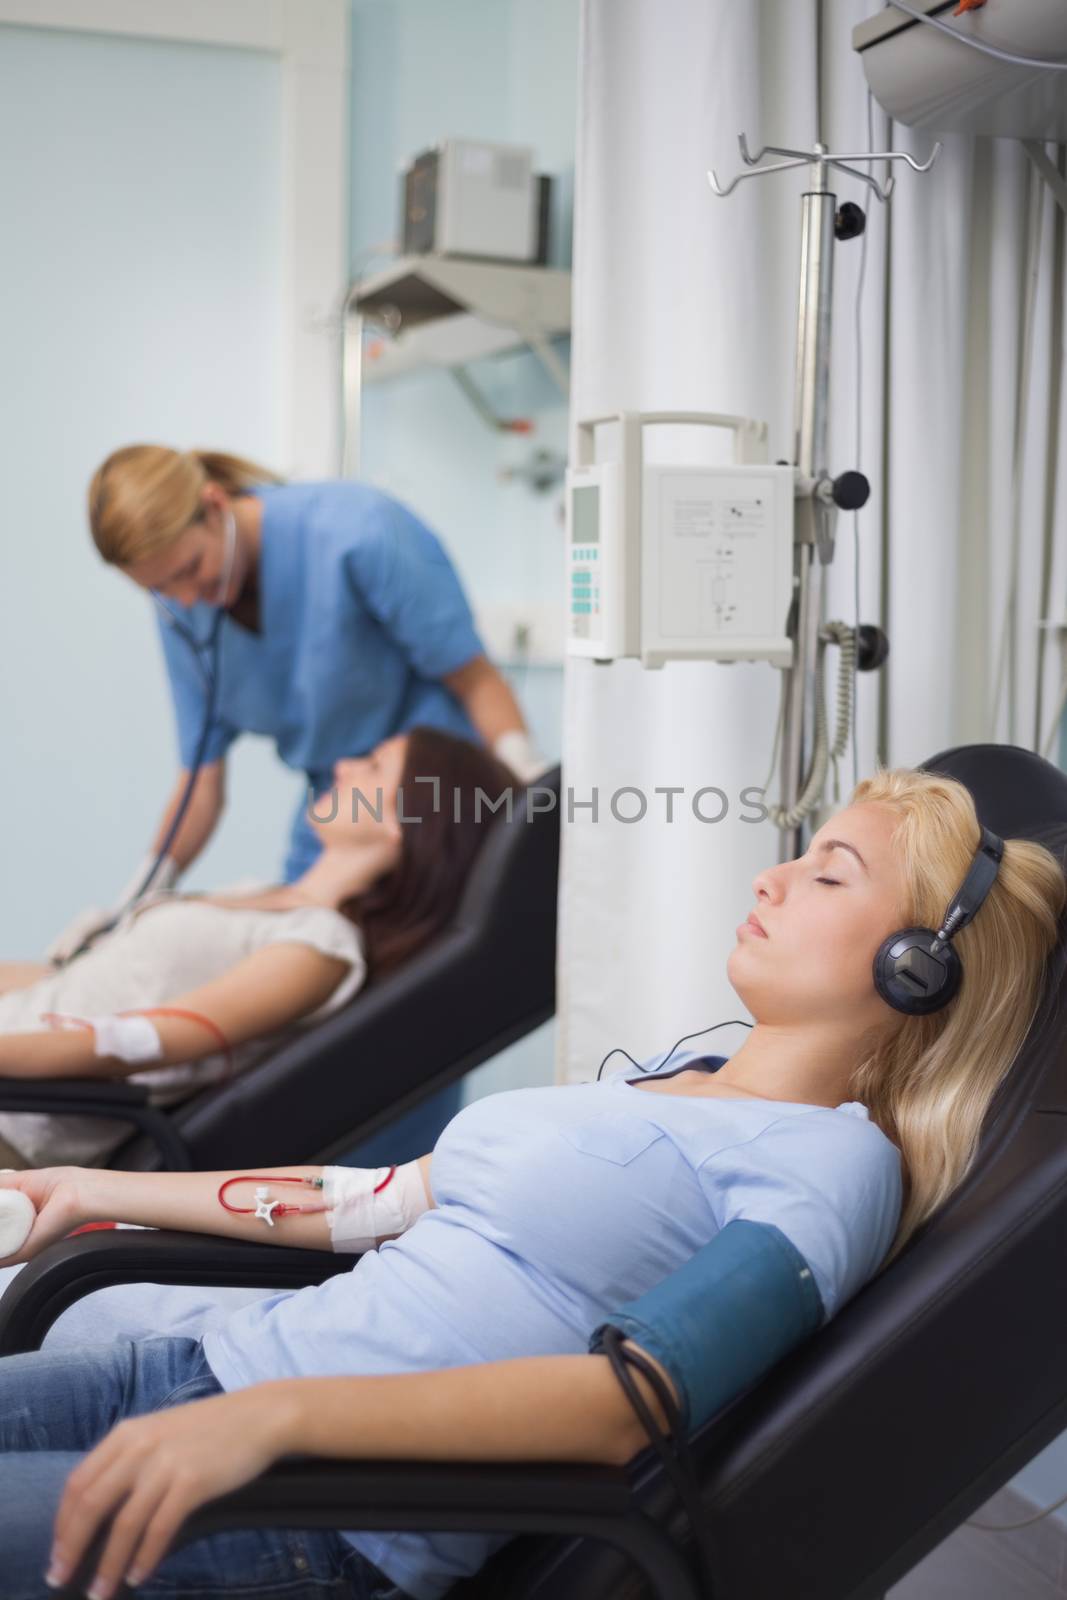 Female patient listening music while being transfused in hospital ward